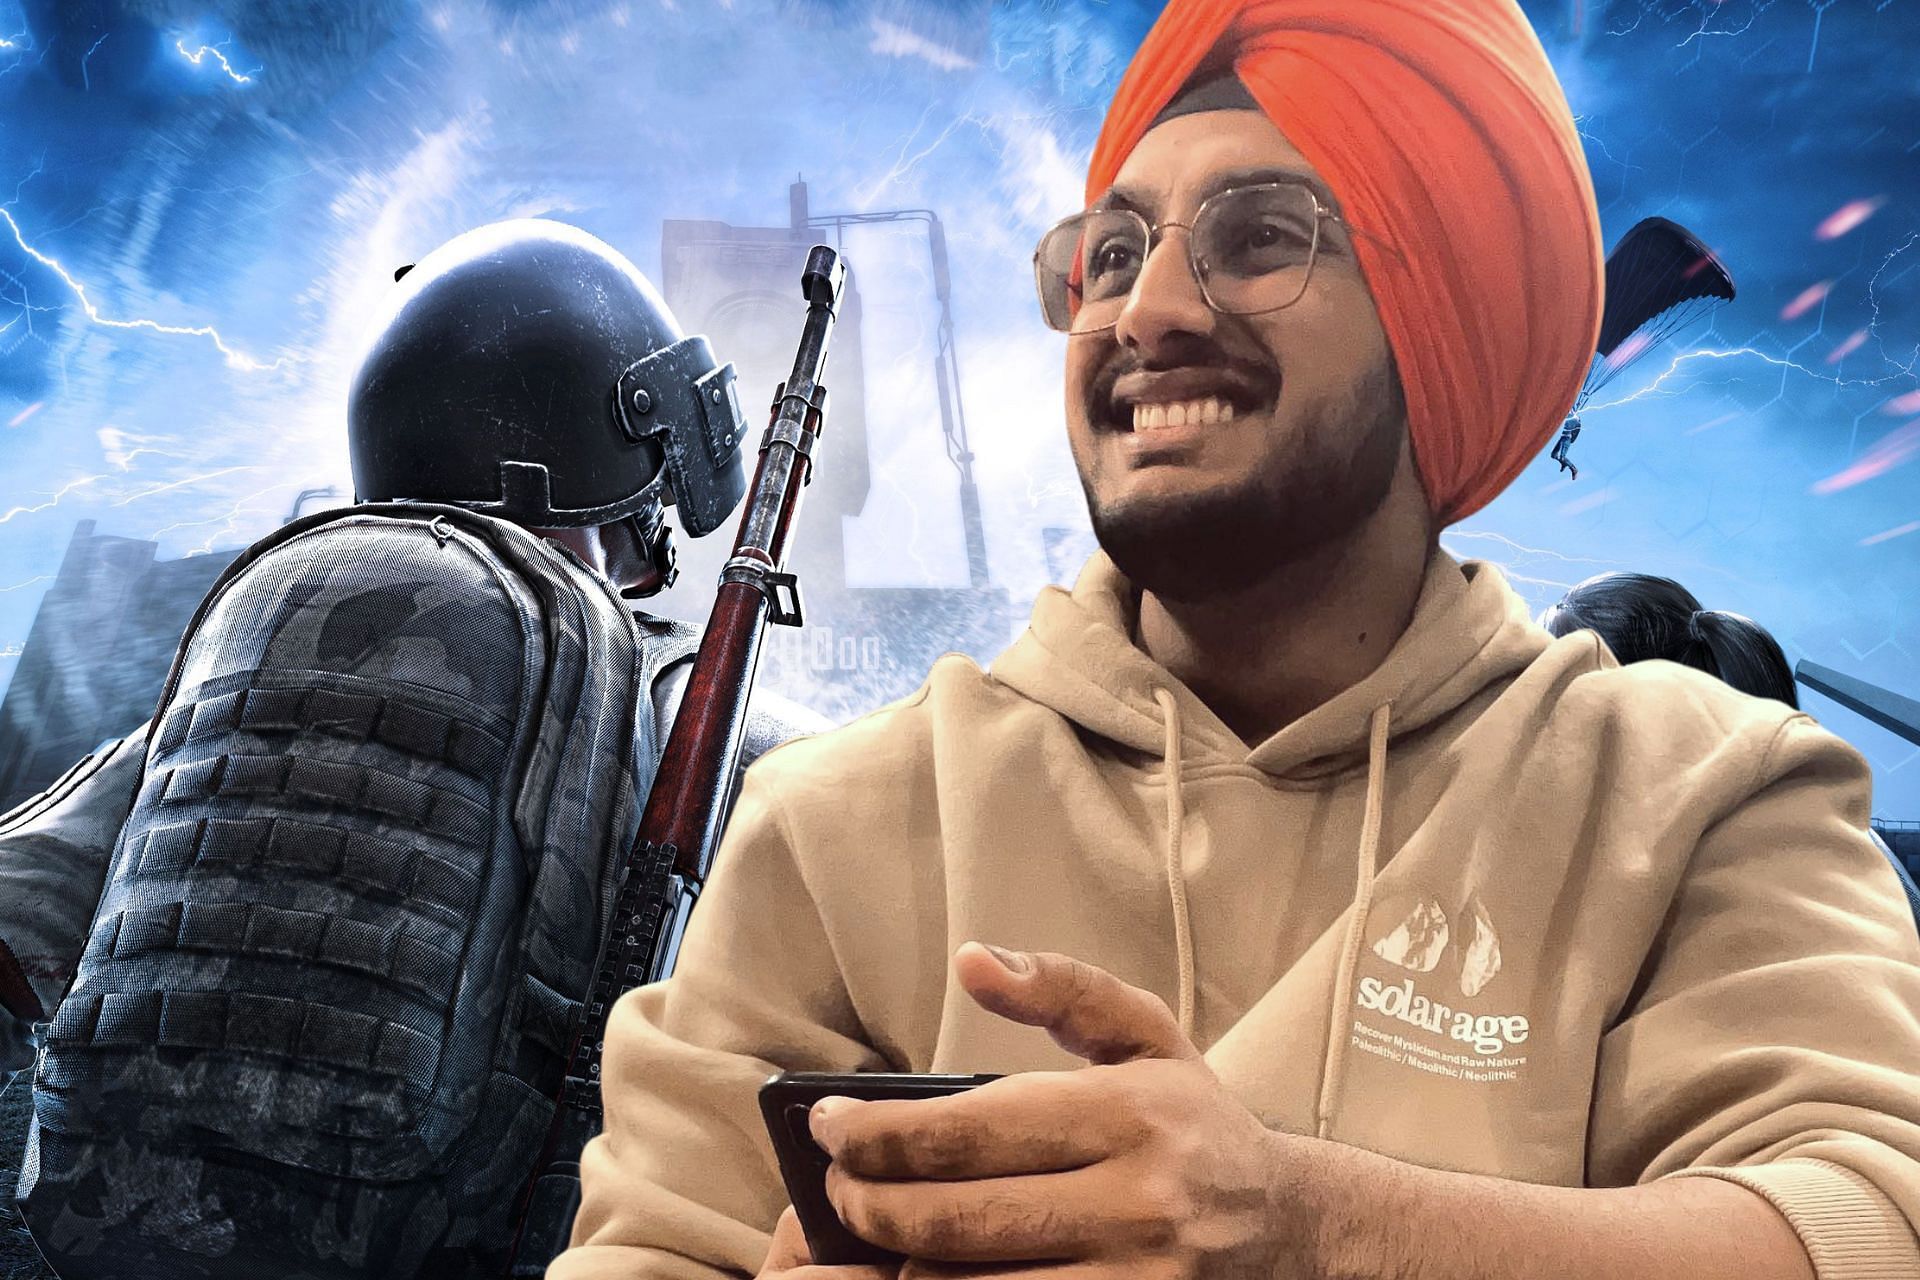 Sardarji speaks about BGMI esports teams and the impact of the game